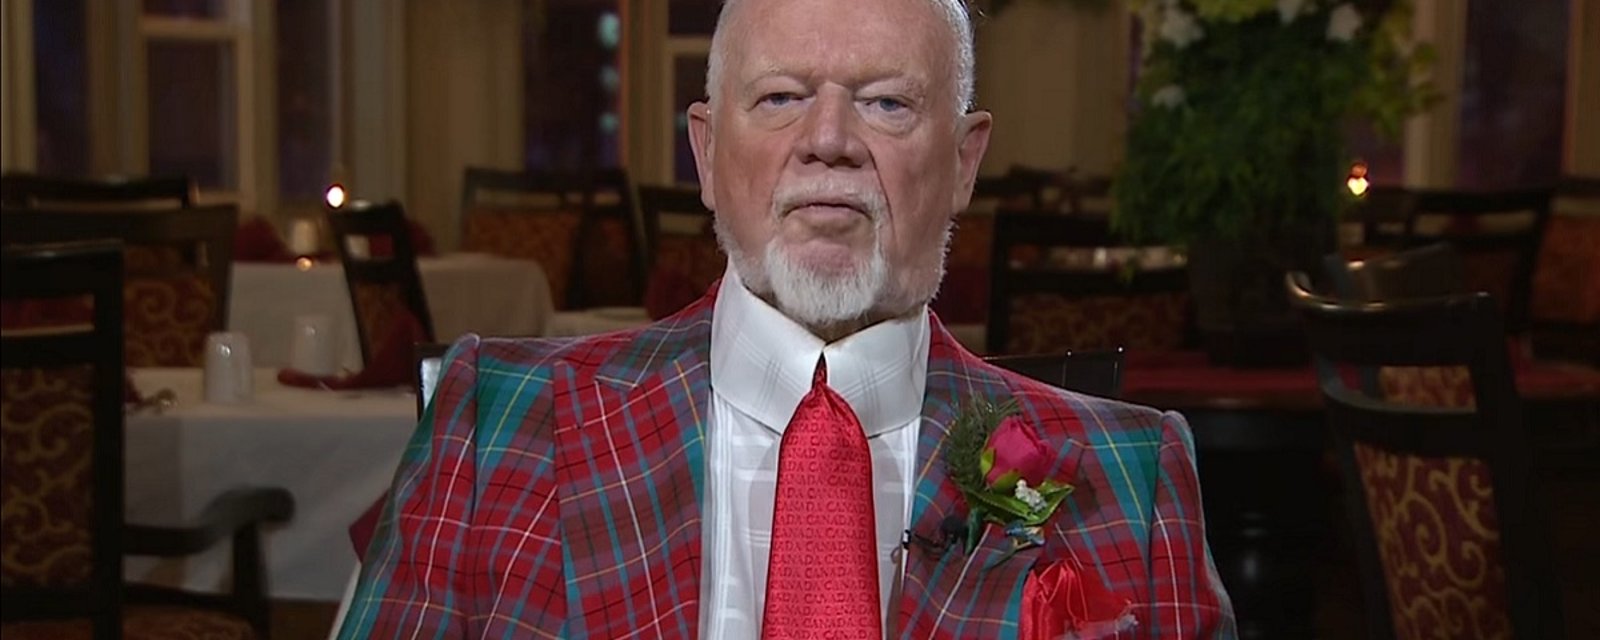 Don Cherry responds to rumors of his firing.